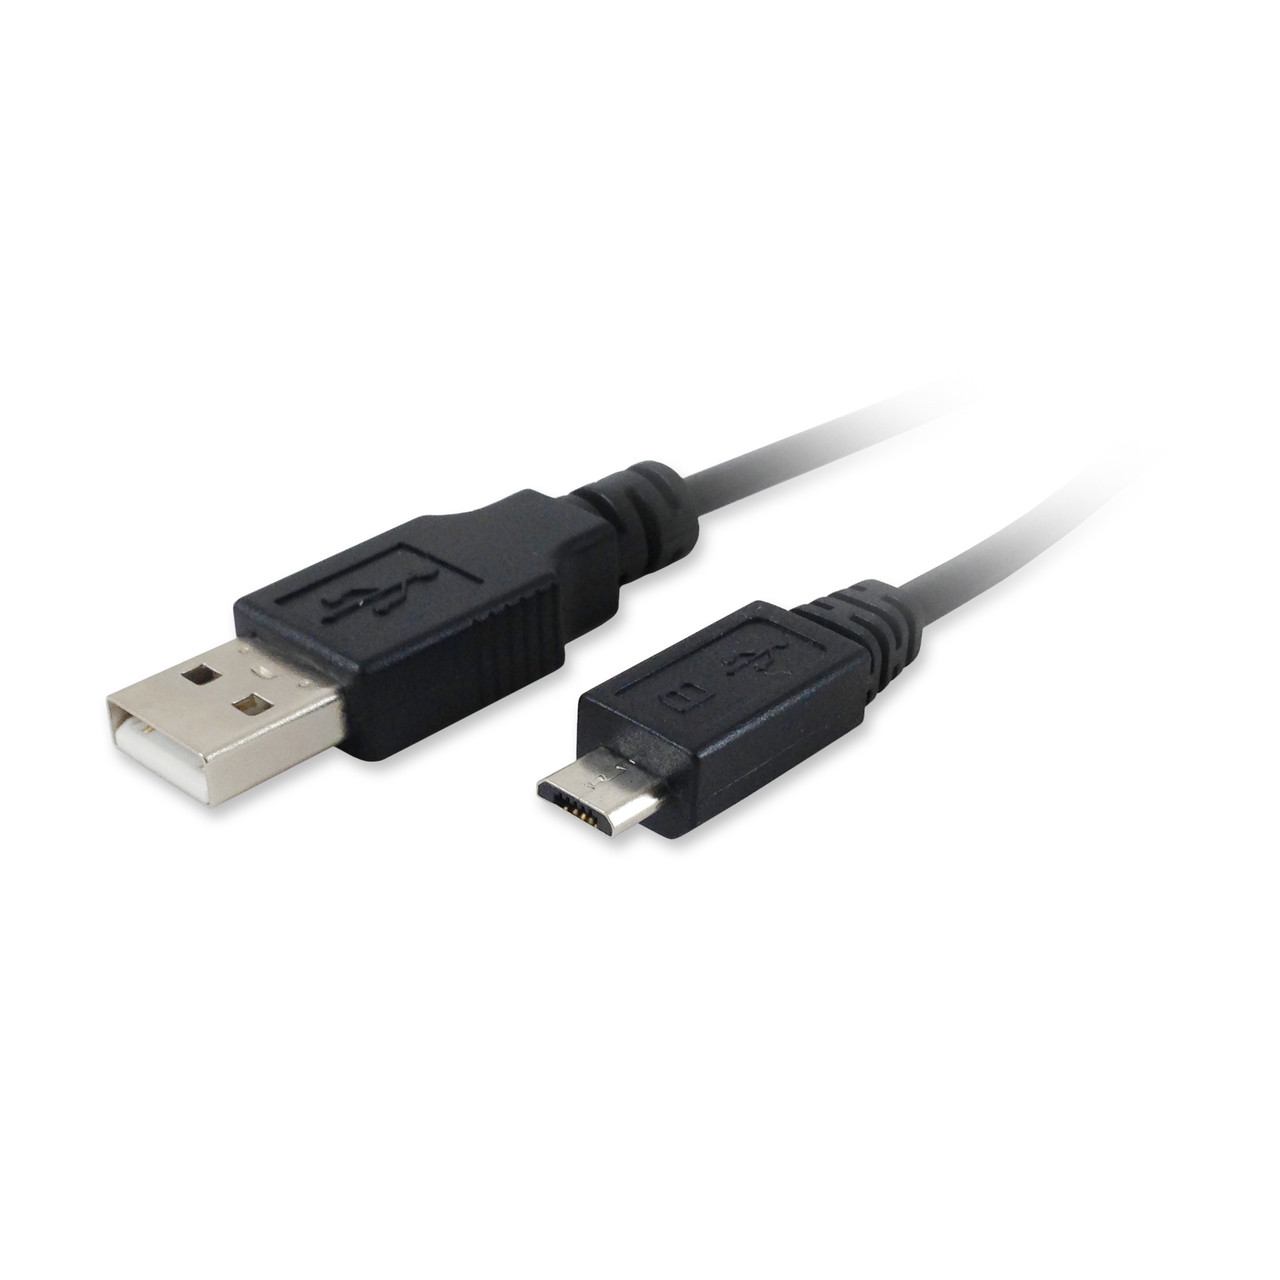 CAB-USB-MICROB-3 Micro USB 2.0 Cable, Type A to Micro B, 3ft